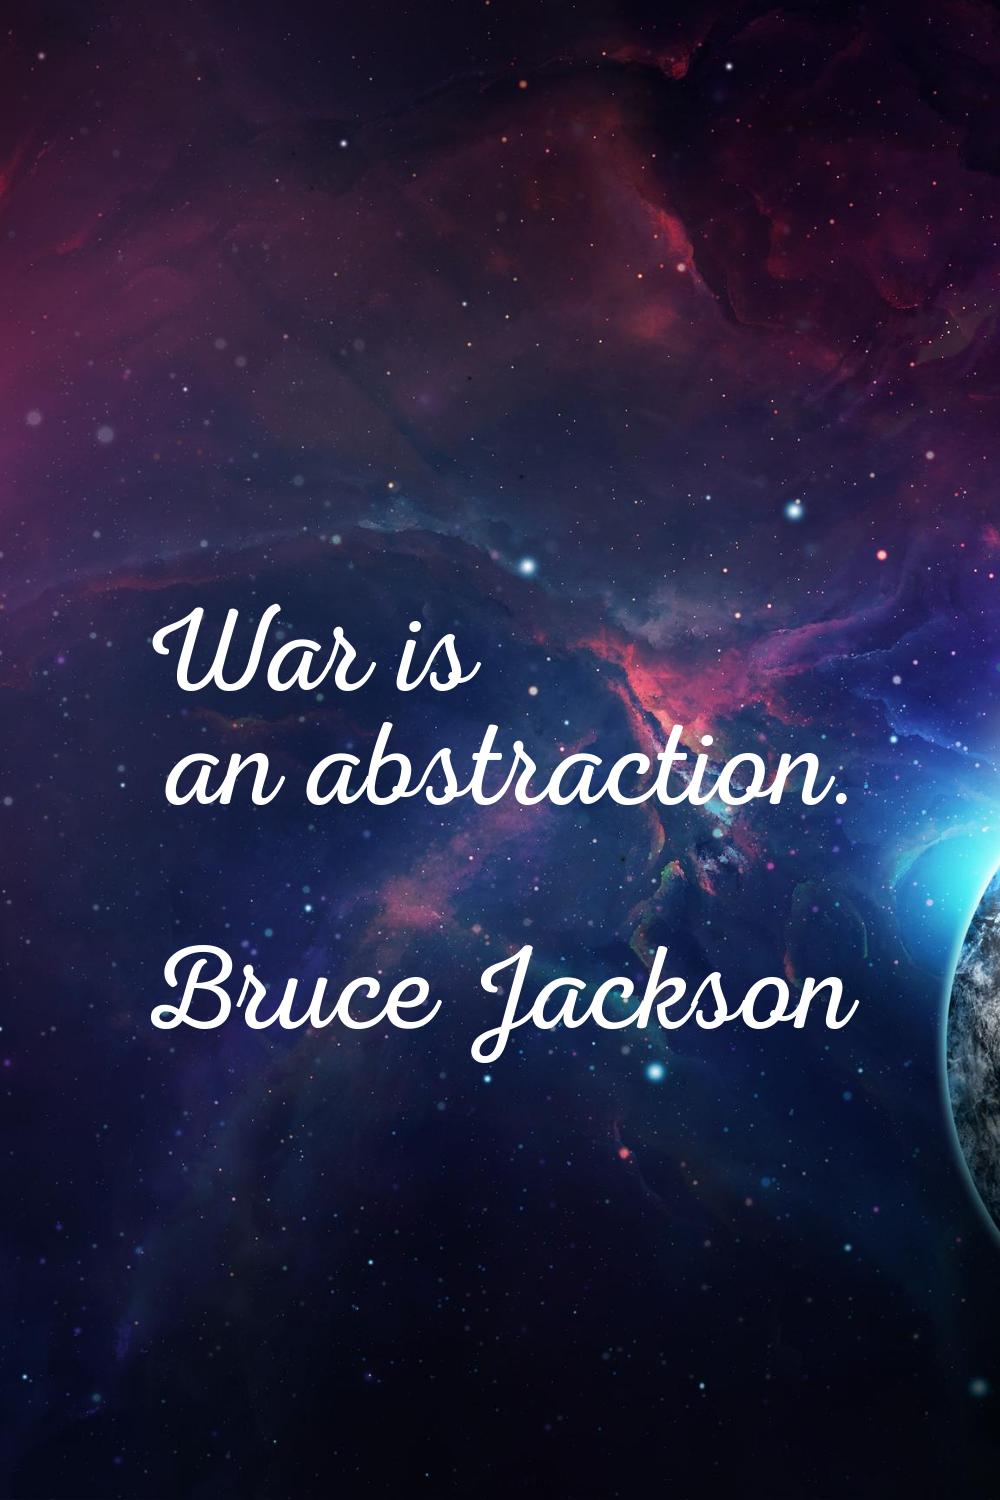 War is an abstraction.